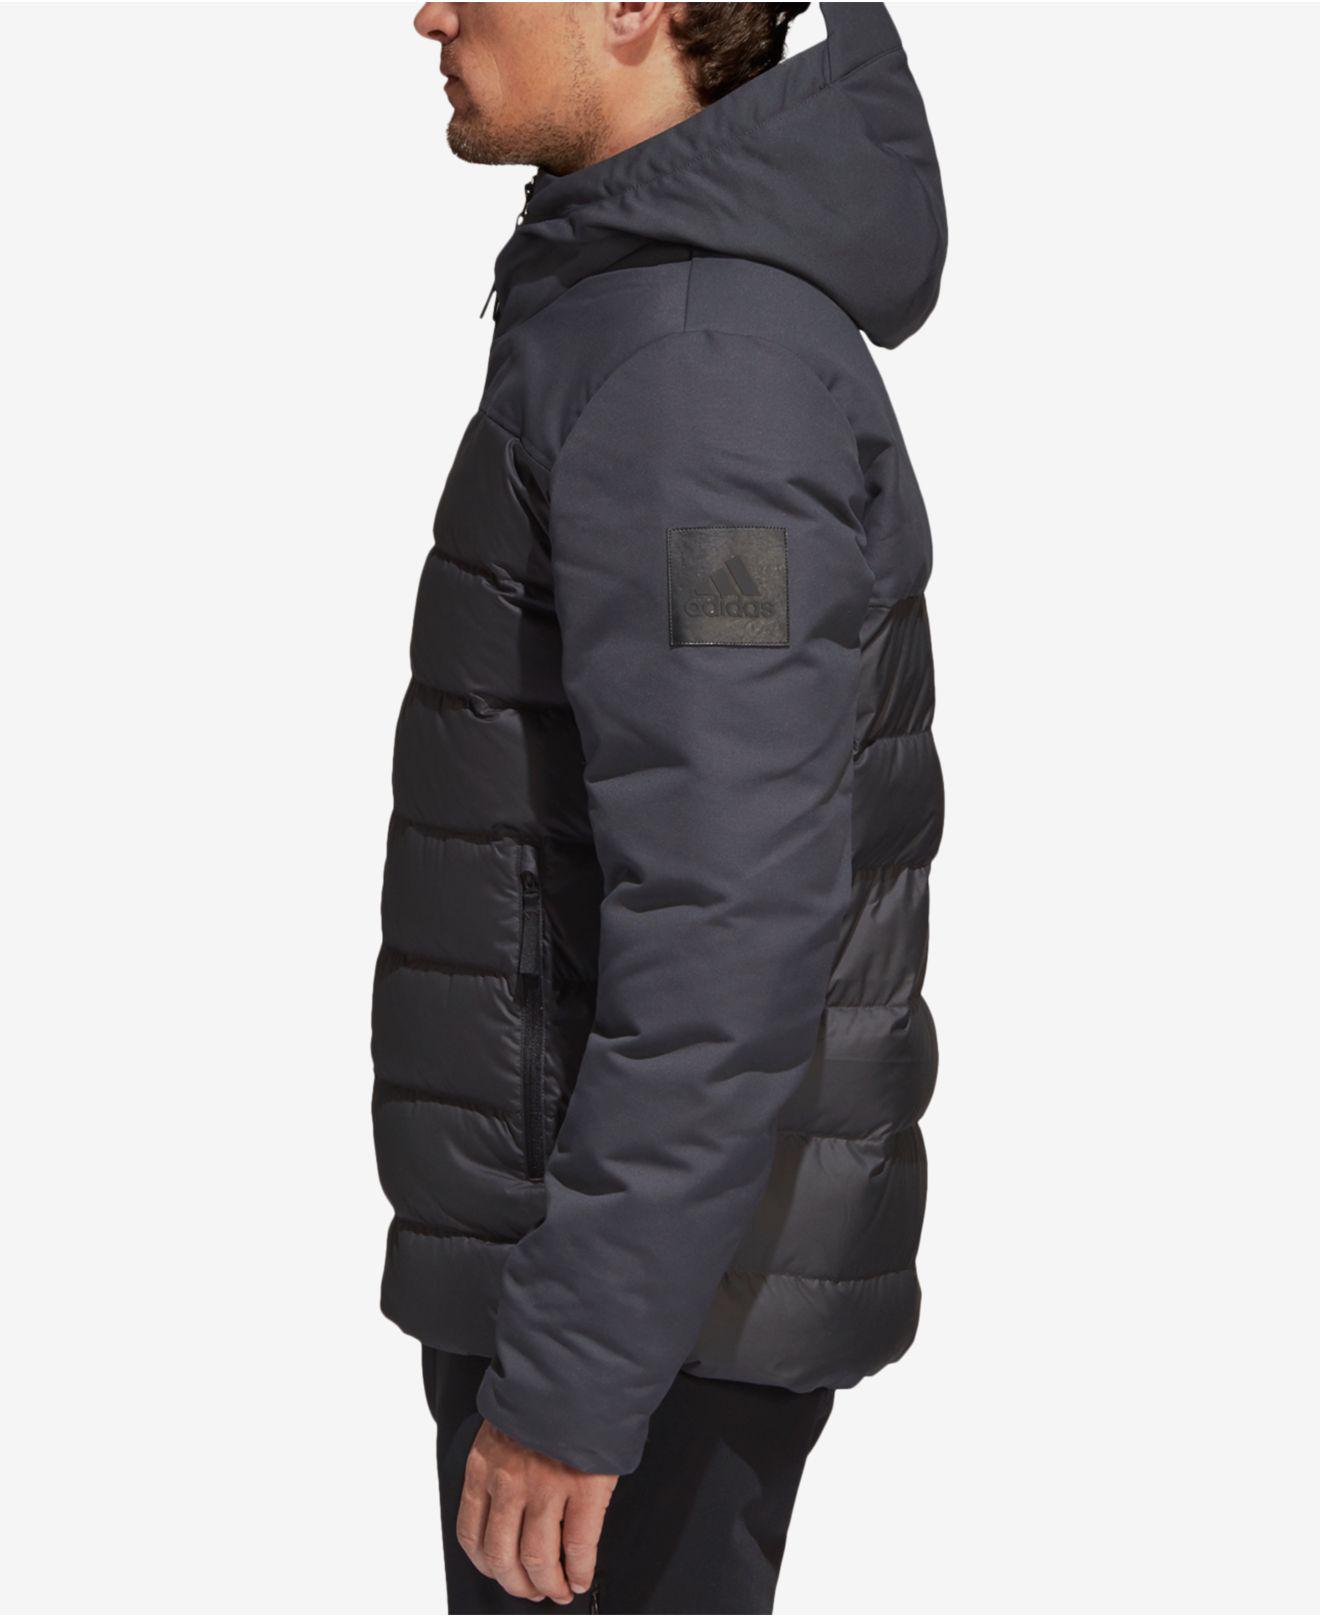 Lyst - adidas Climawarm® Down Jacket in Black for Men